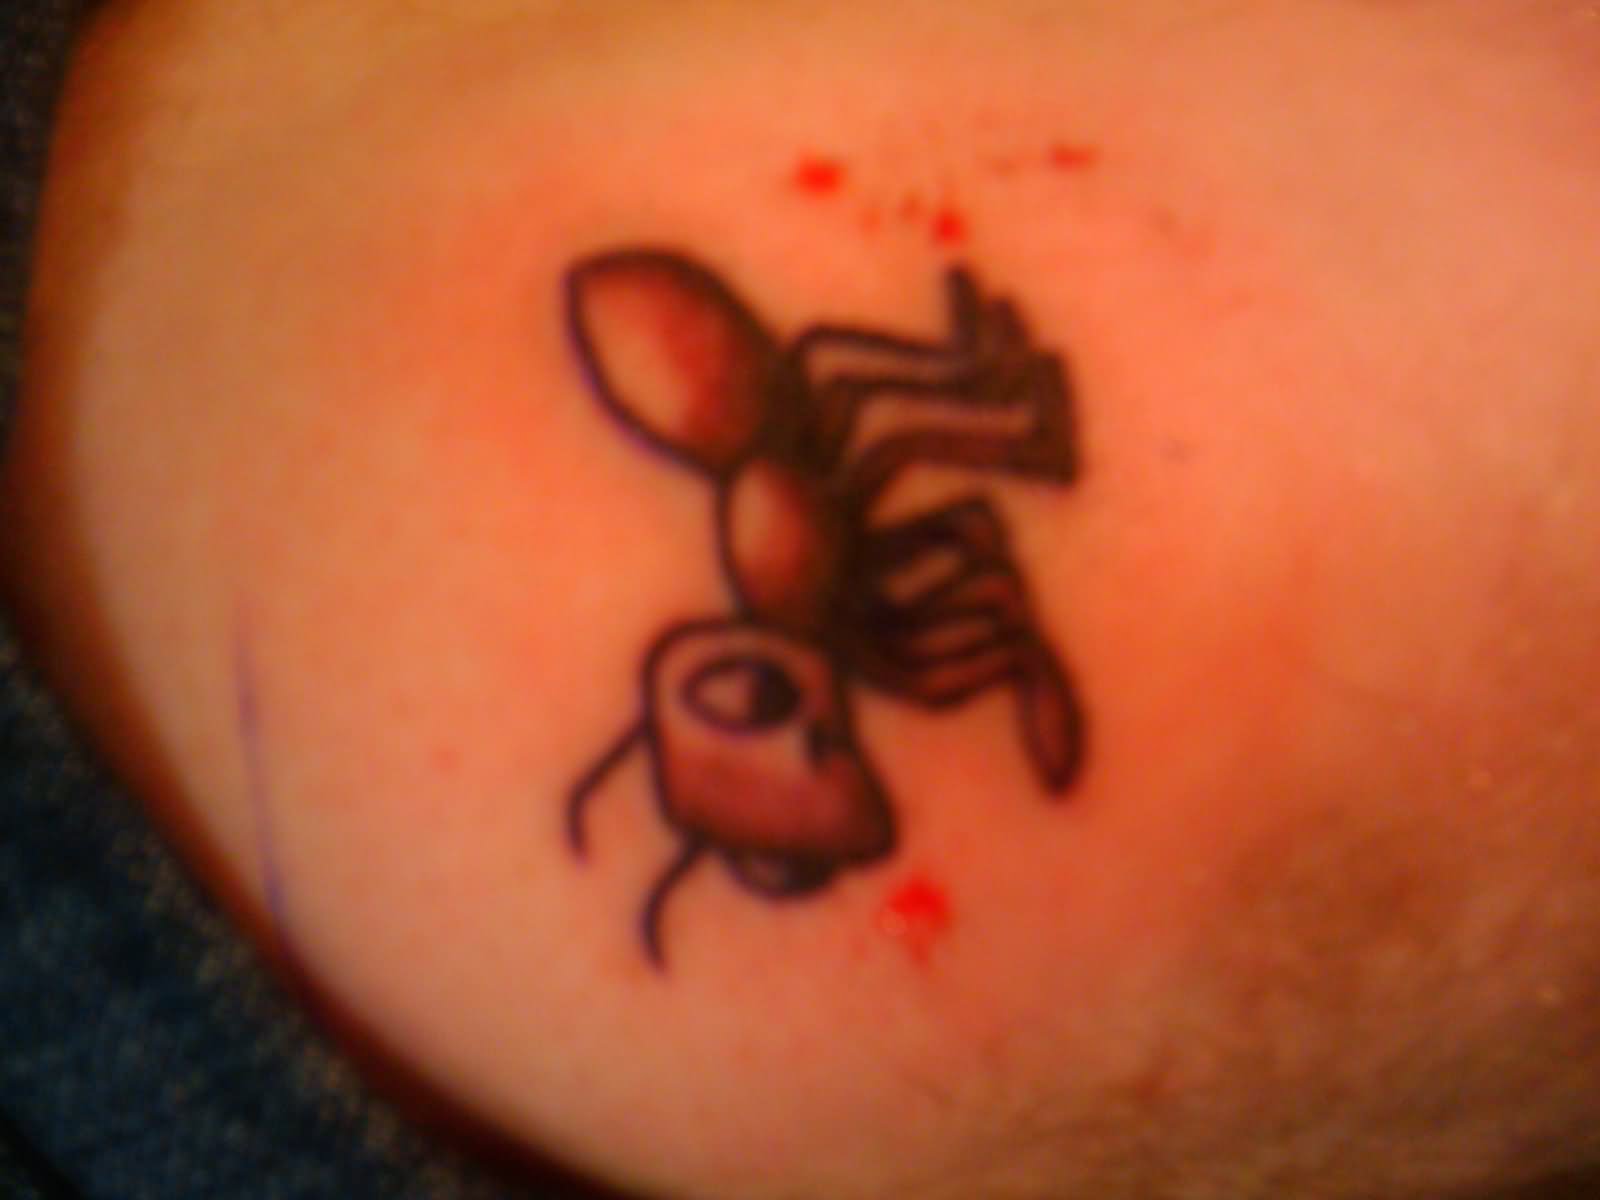 Lesbian couple gets matching ant tattoos - wide 1